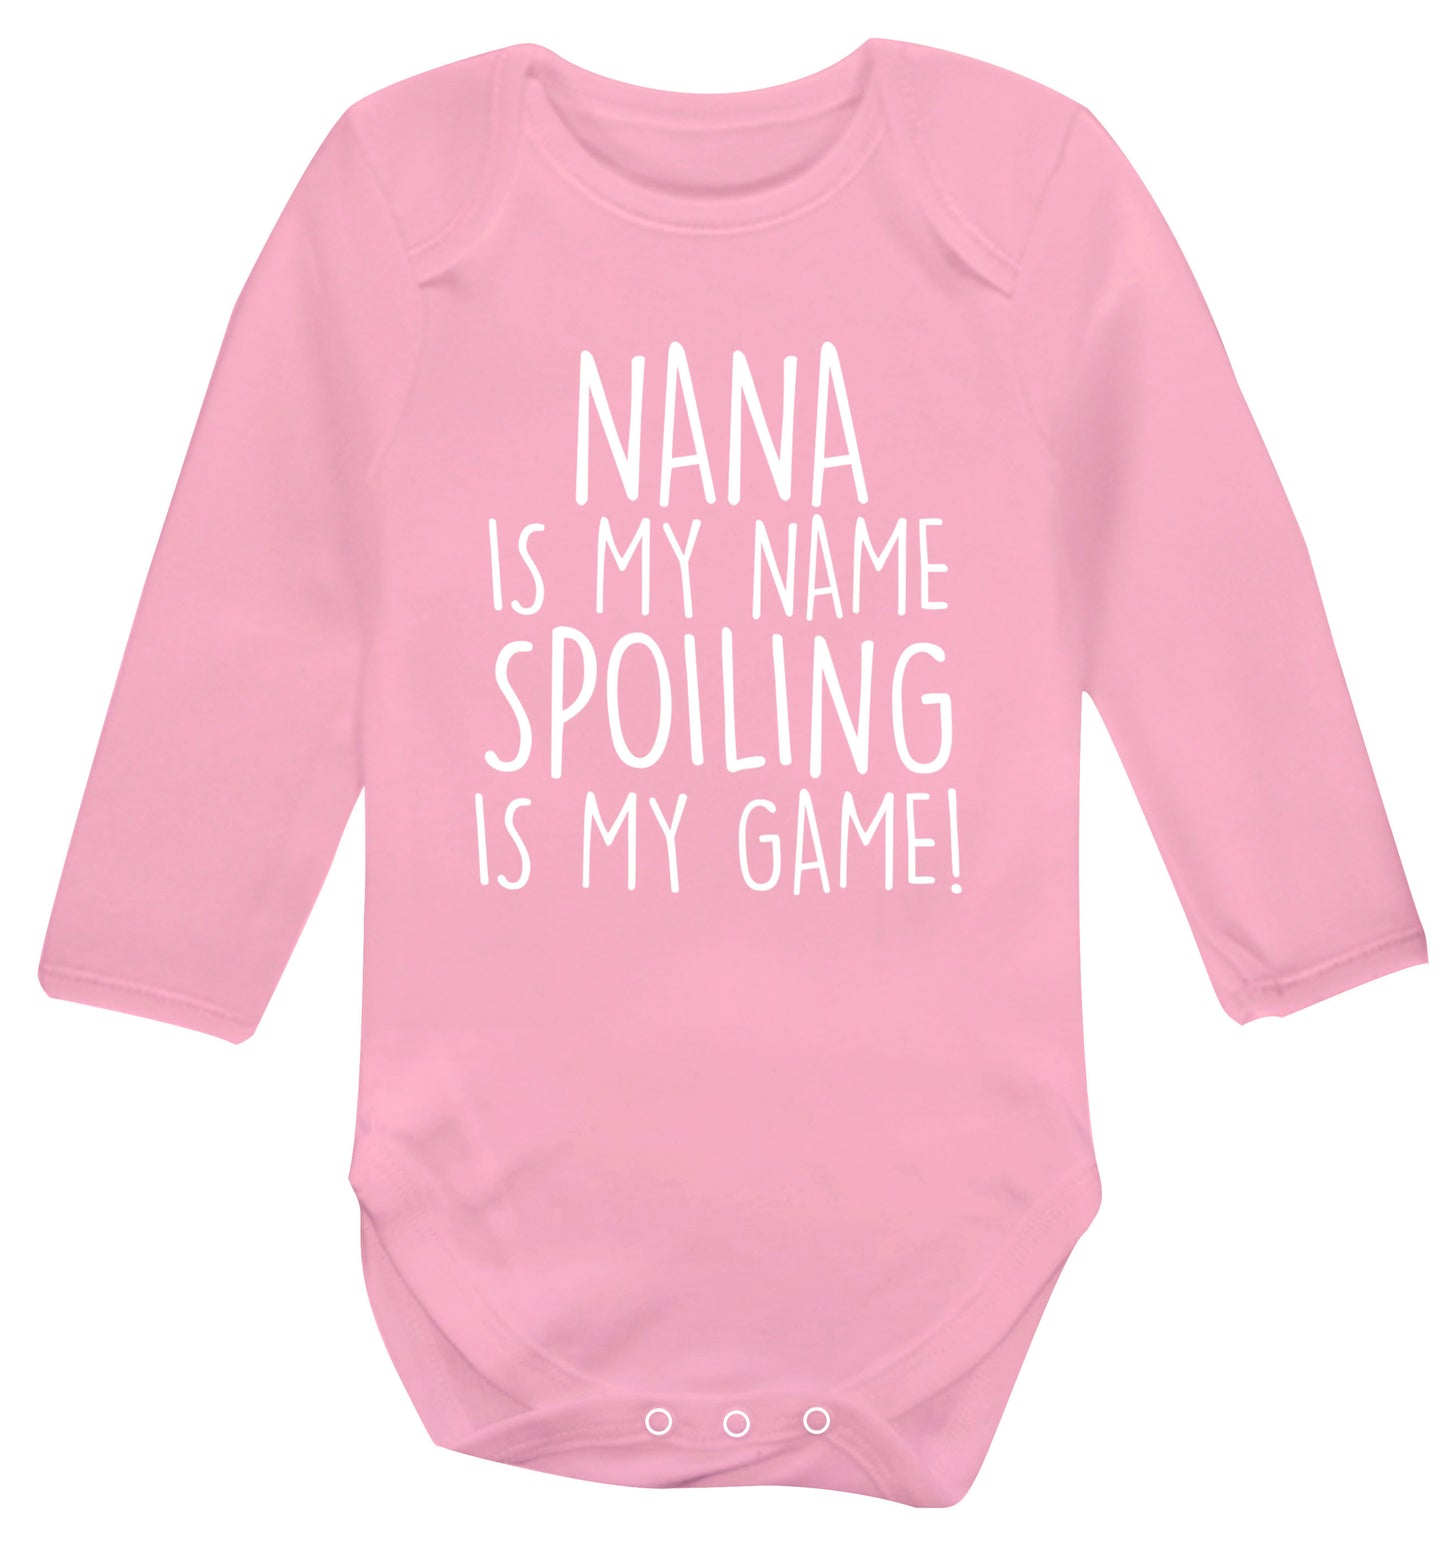 Nana is my name, spoiling is my game Baby Vest long sleeved pale pink 6-12 months